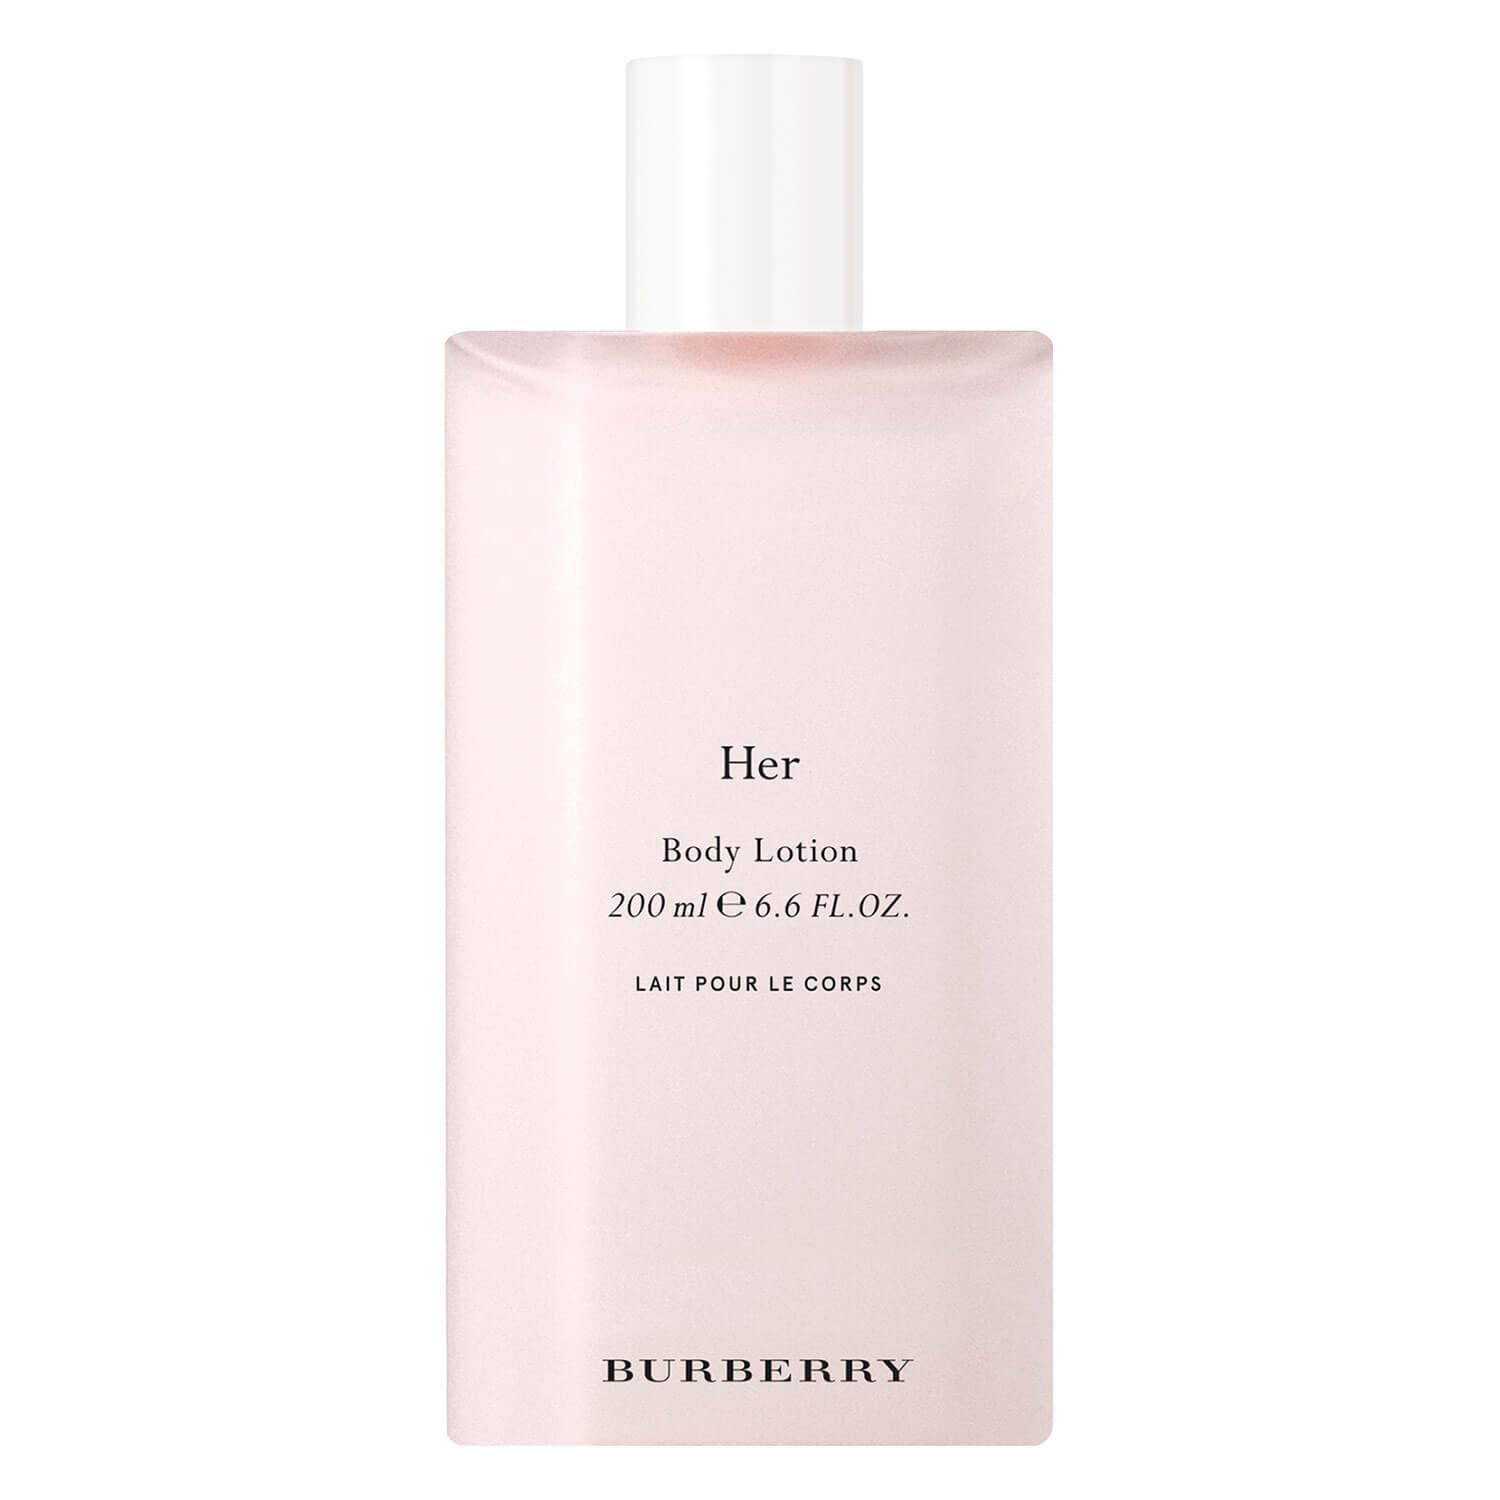 Burberry HER - Body Lotion